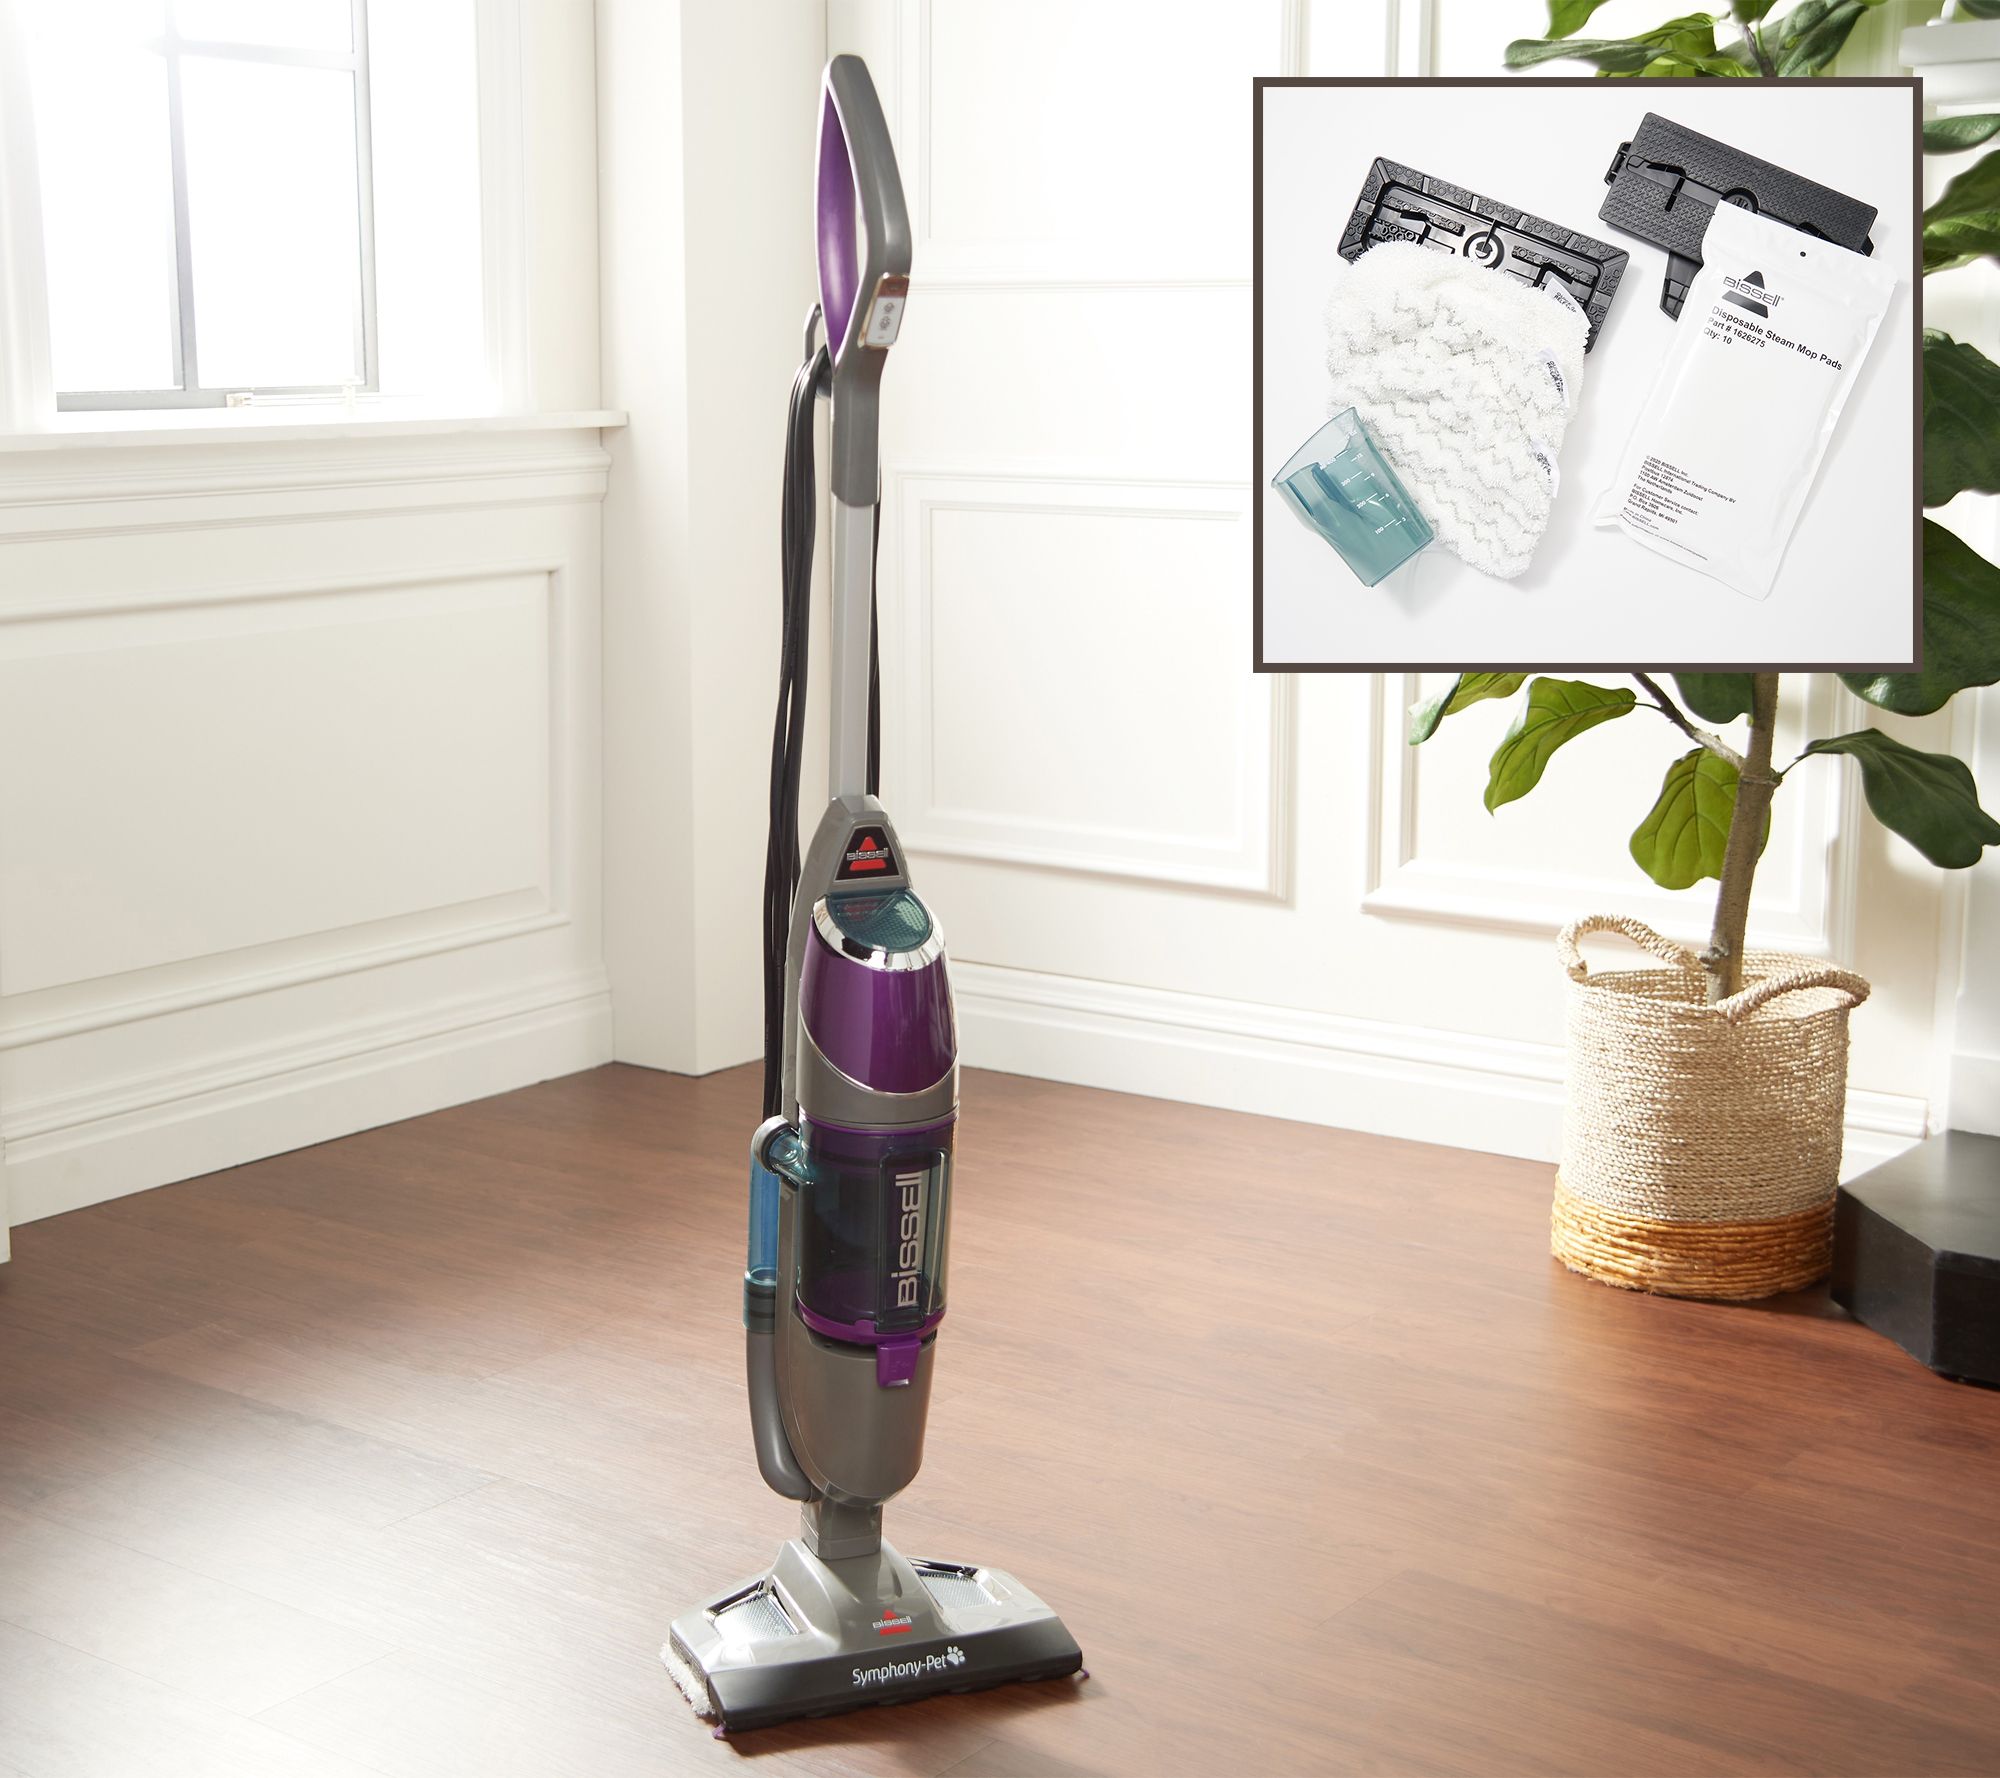 nikotin tank virkelighed Bissell Symphony Pet 2-in-1 Vacuum & Steam Mop with Accessories - QVC.com